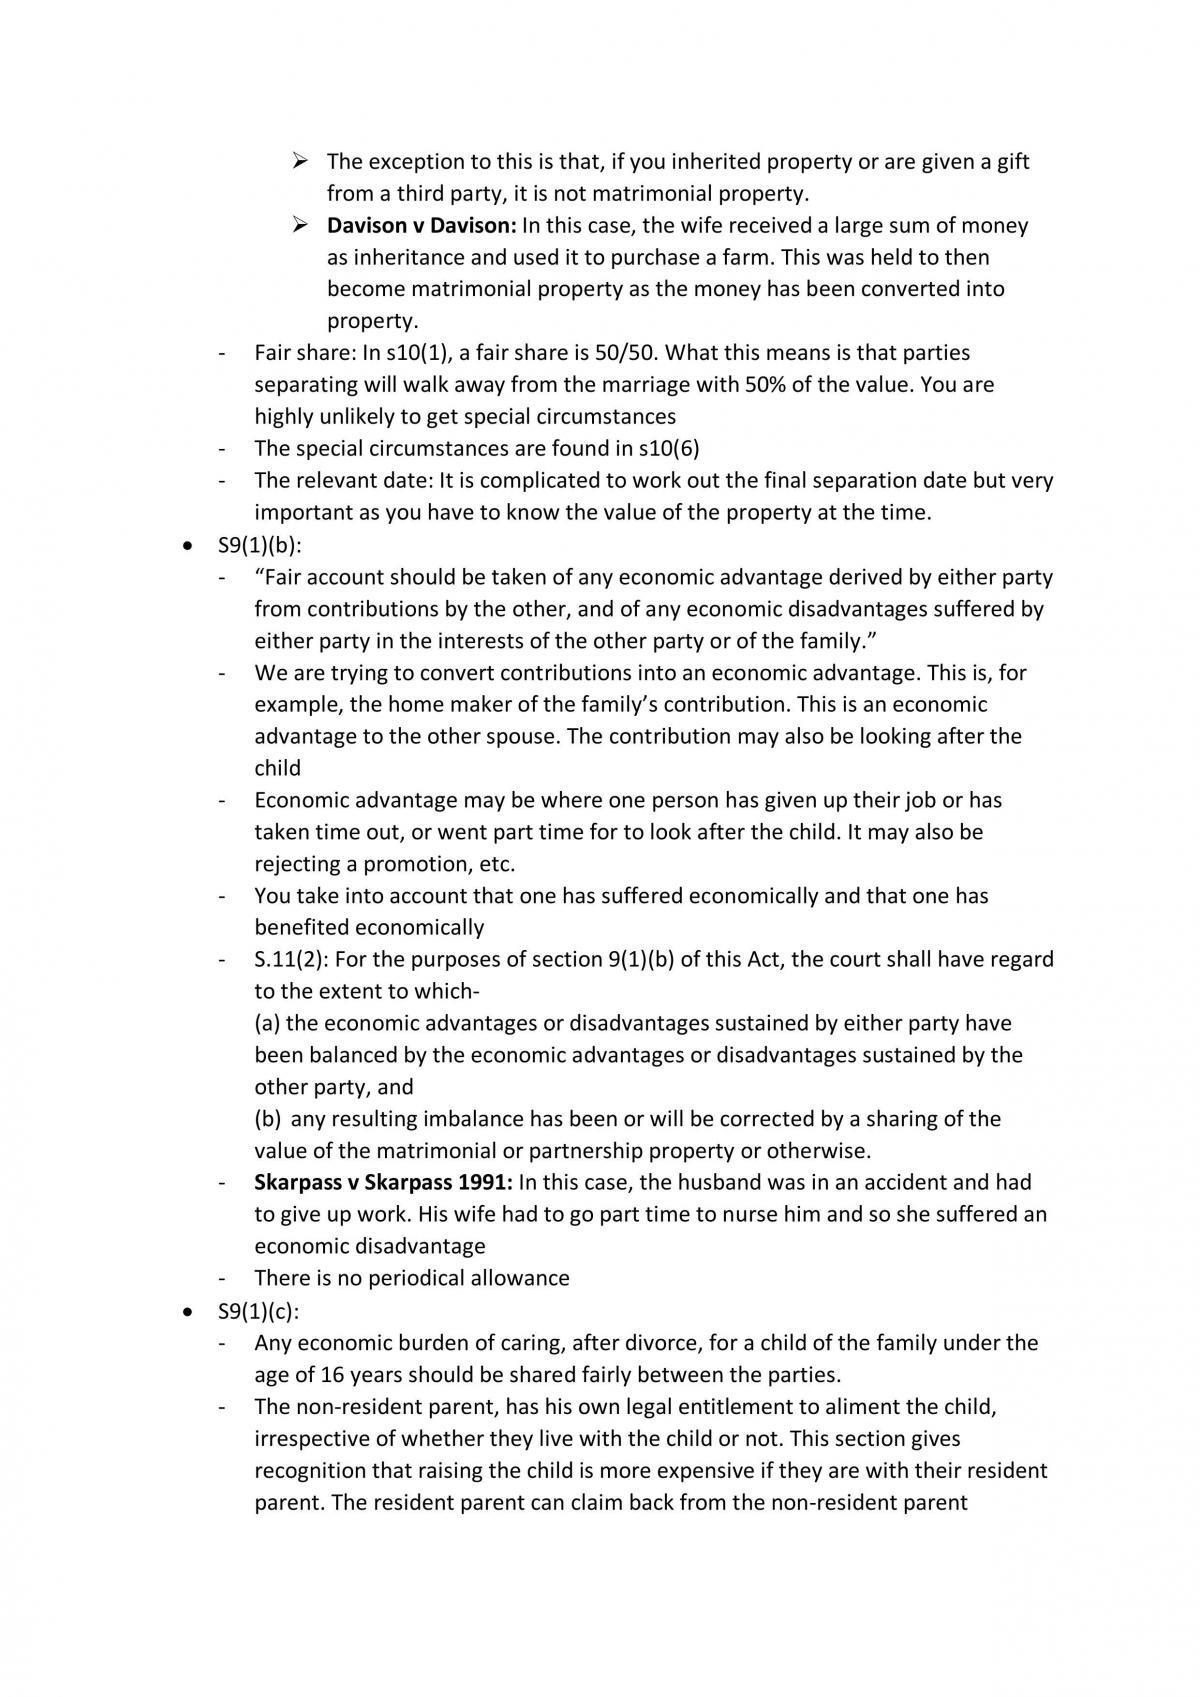 Full Domestic Relations notes  - Page 15